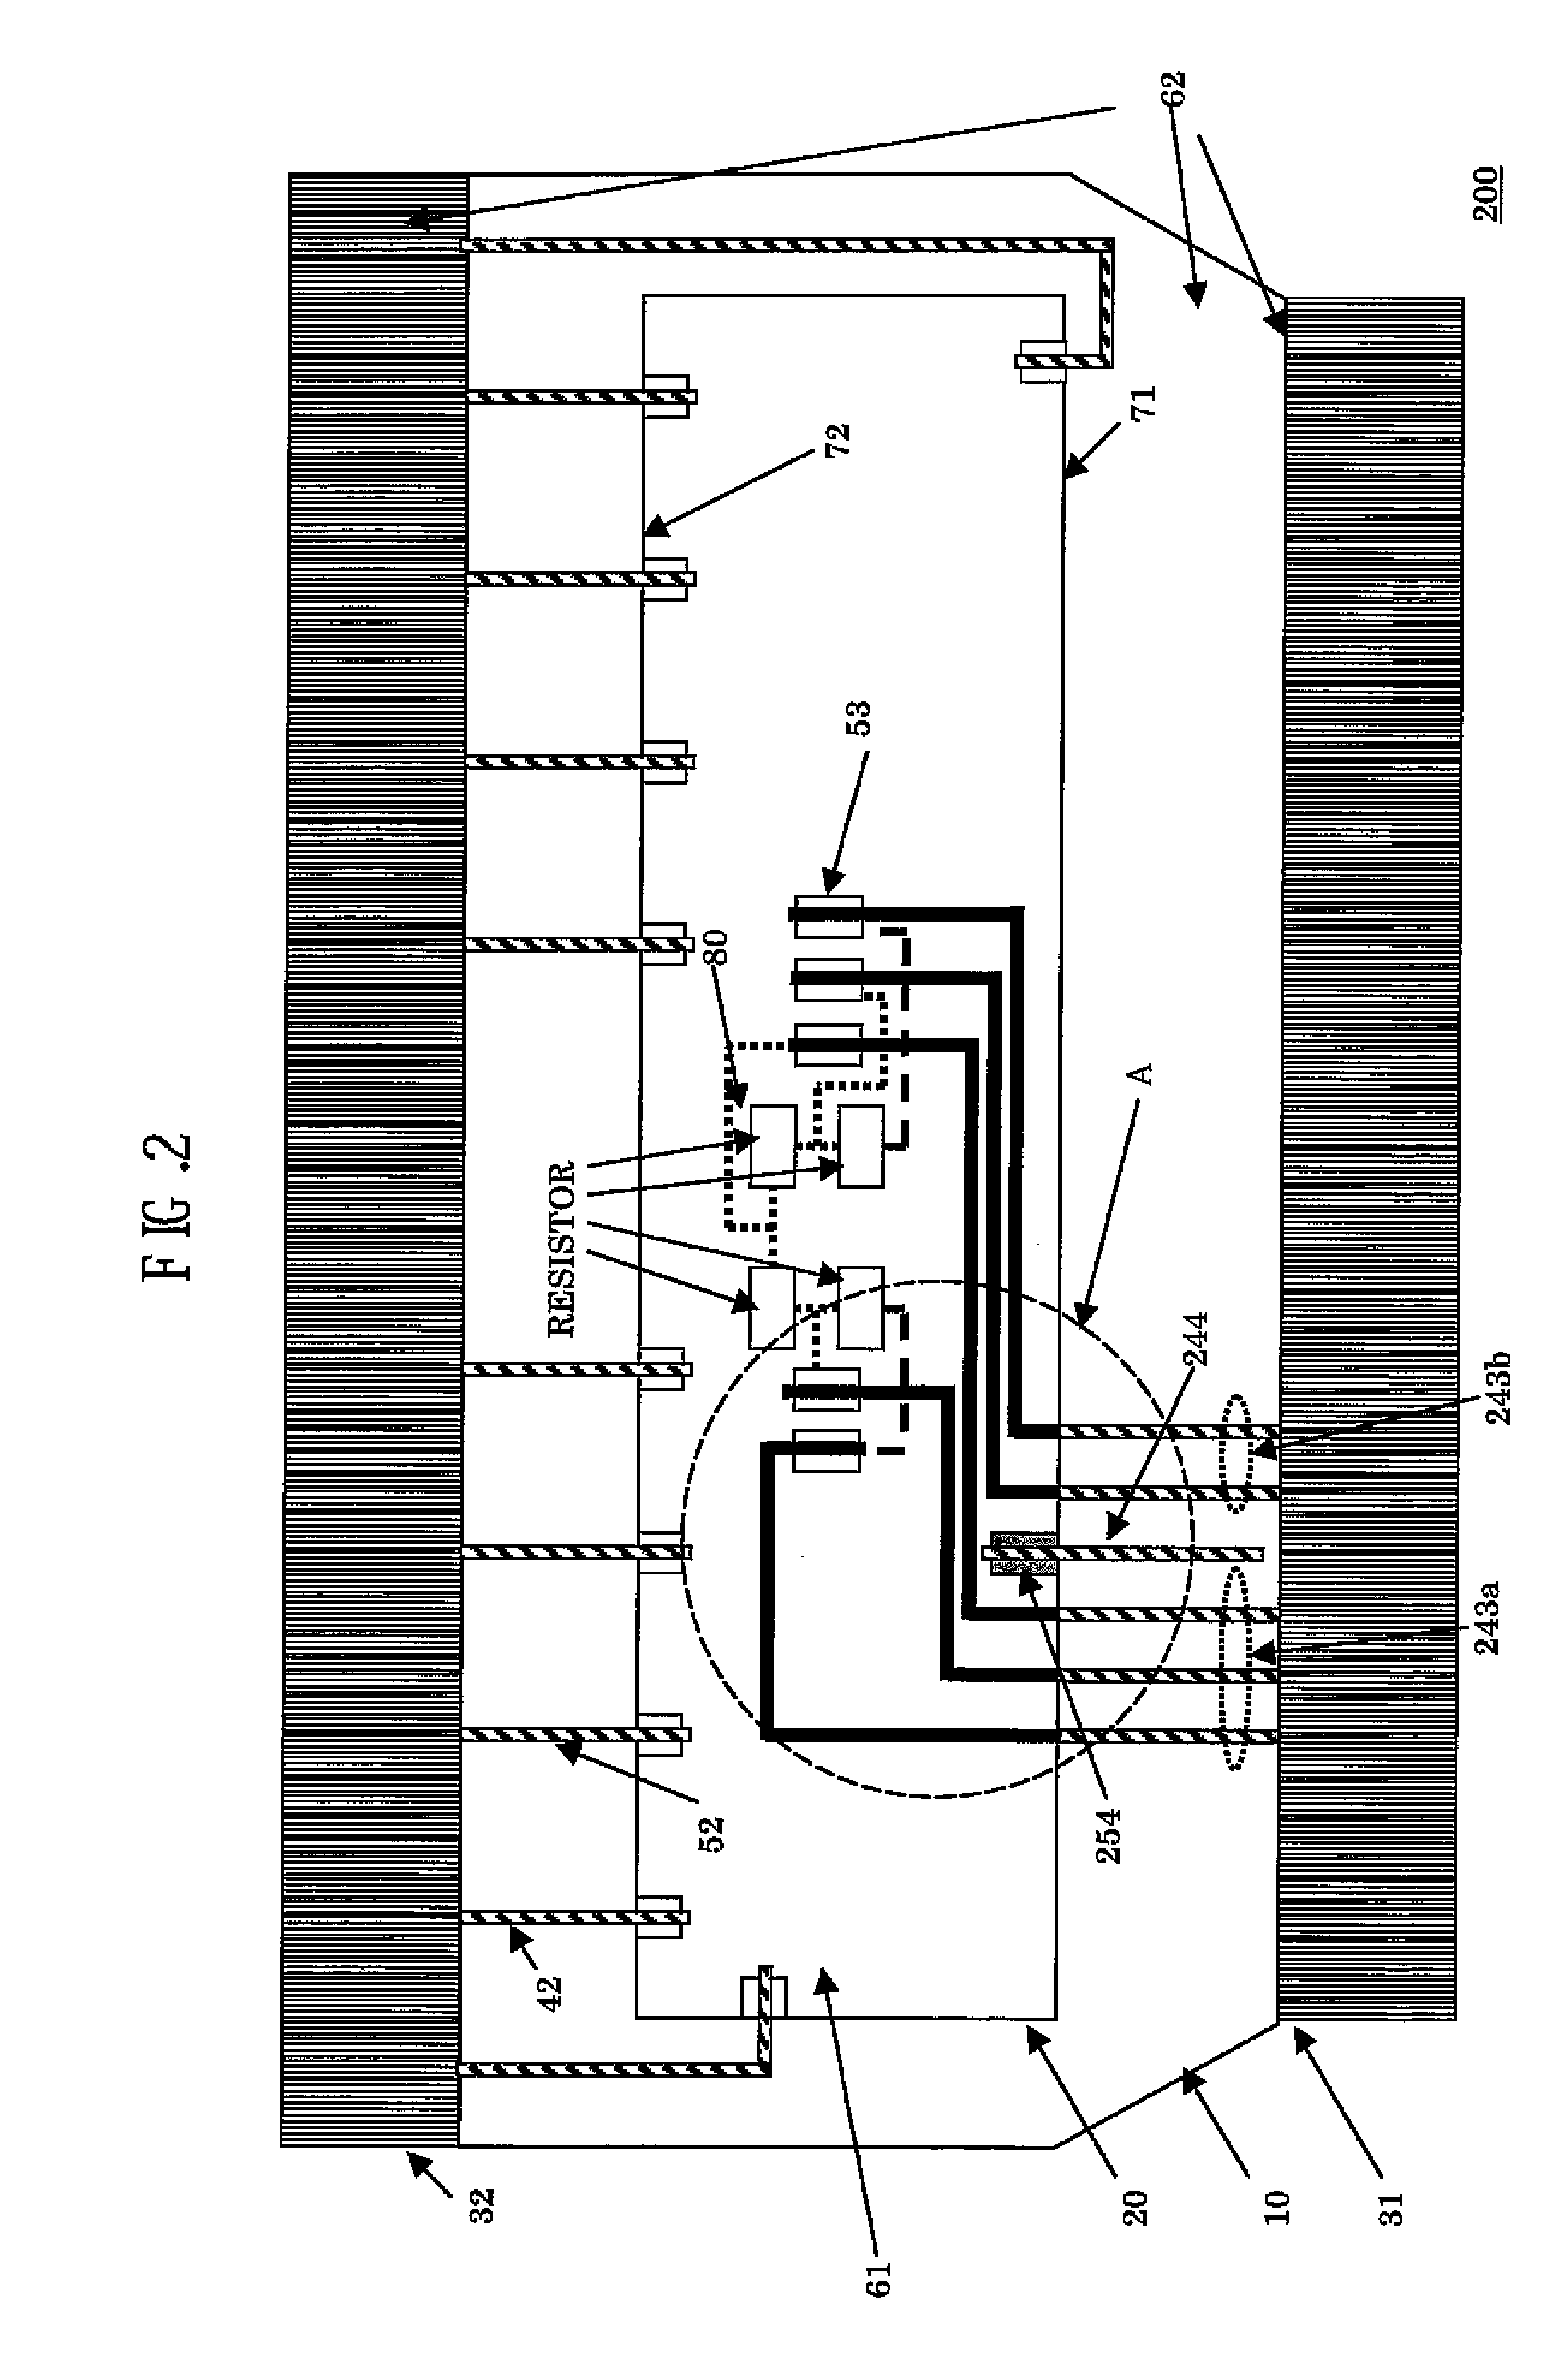 Cof package and tape substrate used in same